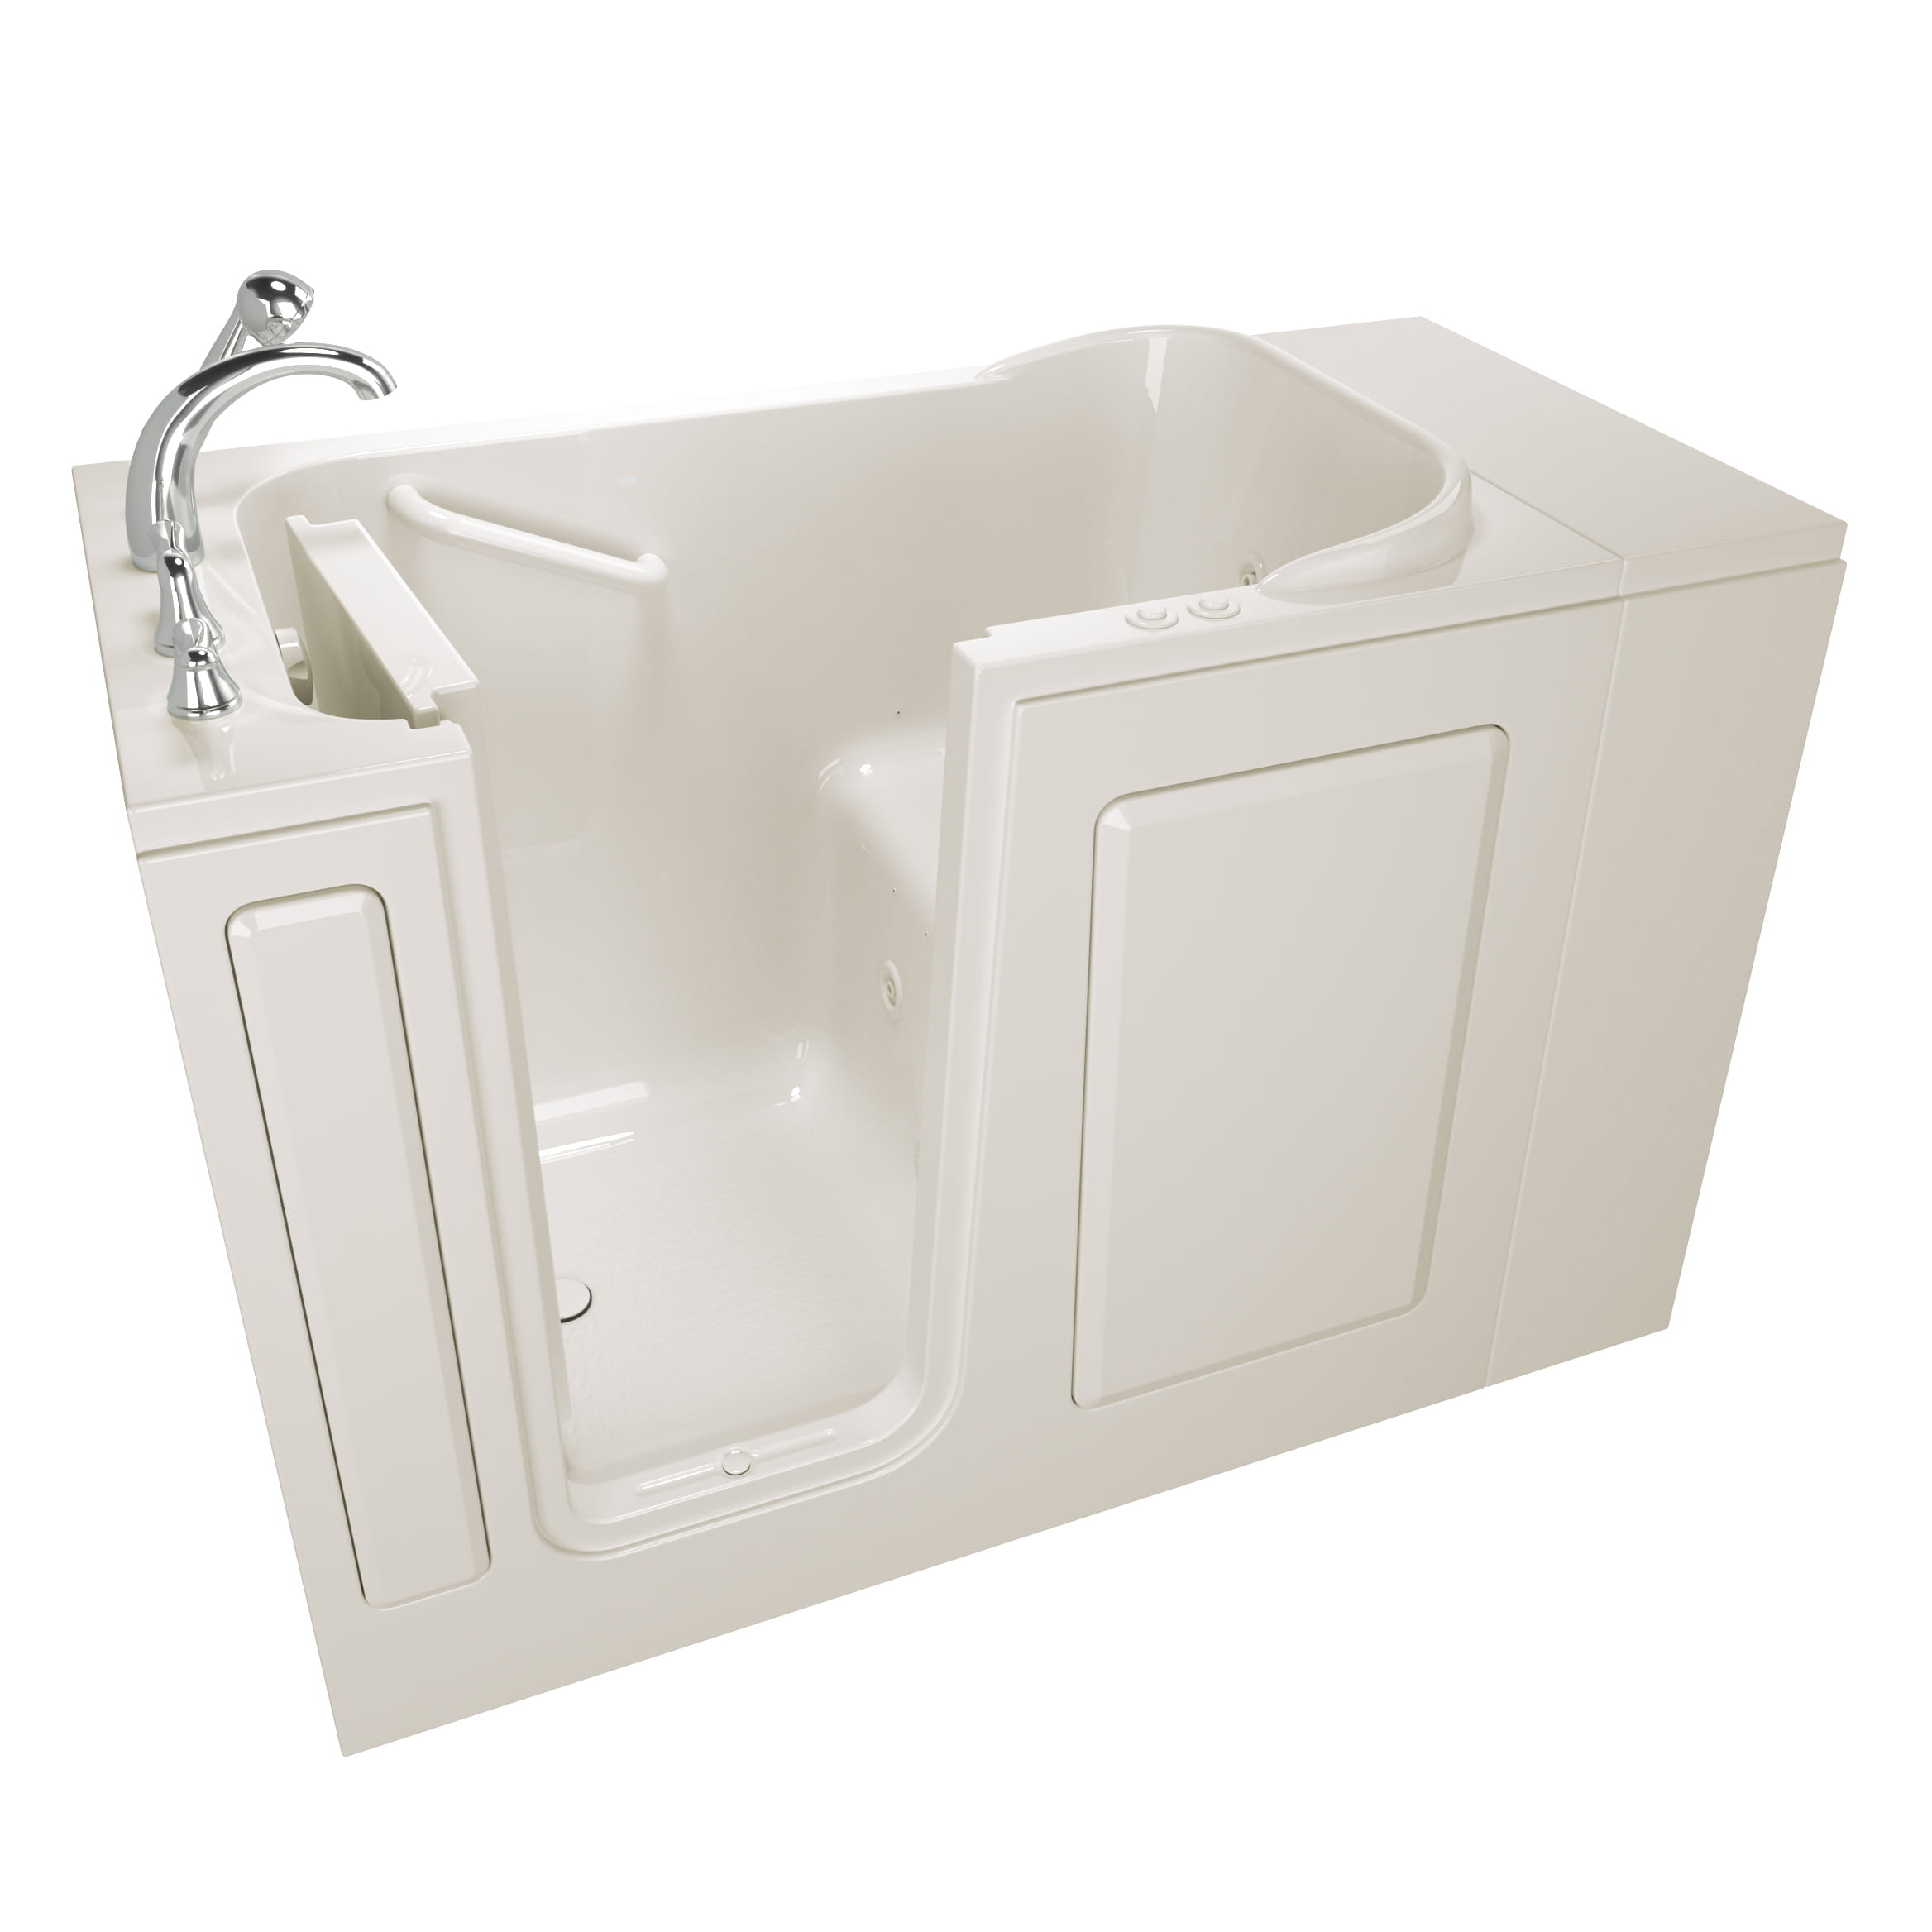 Gelcoat Entry Series 48 x 28 Inch Walk In Tub With Combination Air Spa and Whirlpool Systems - Left Hand Drain With Faucet ST BISCUIT